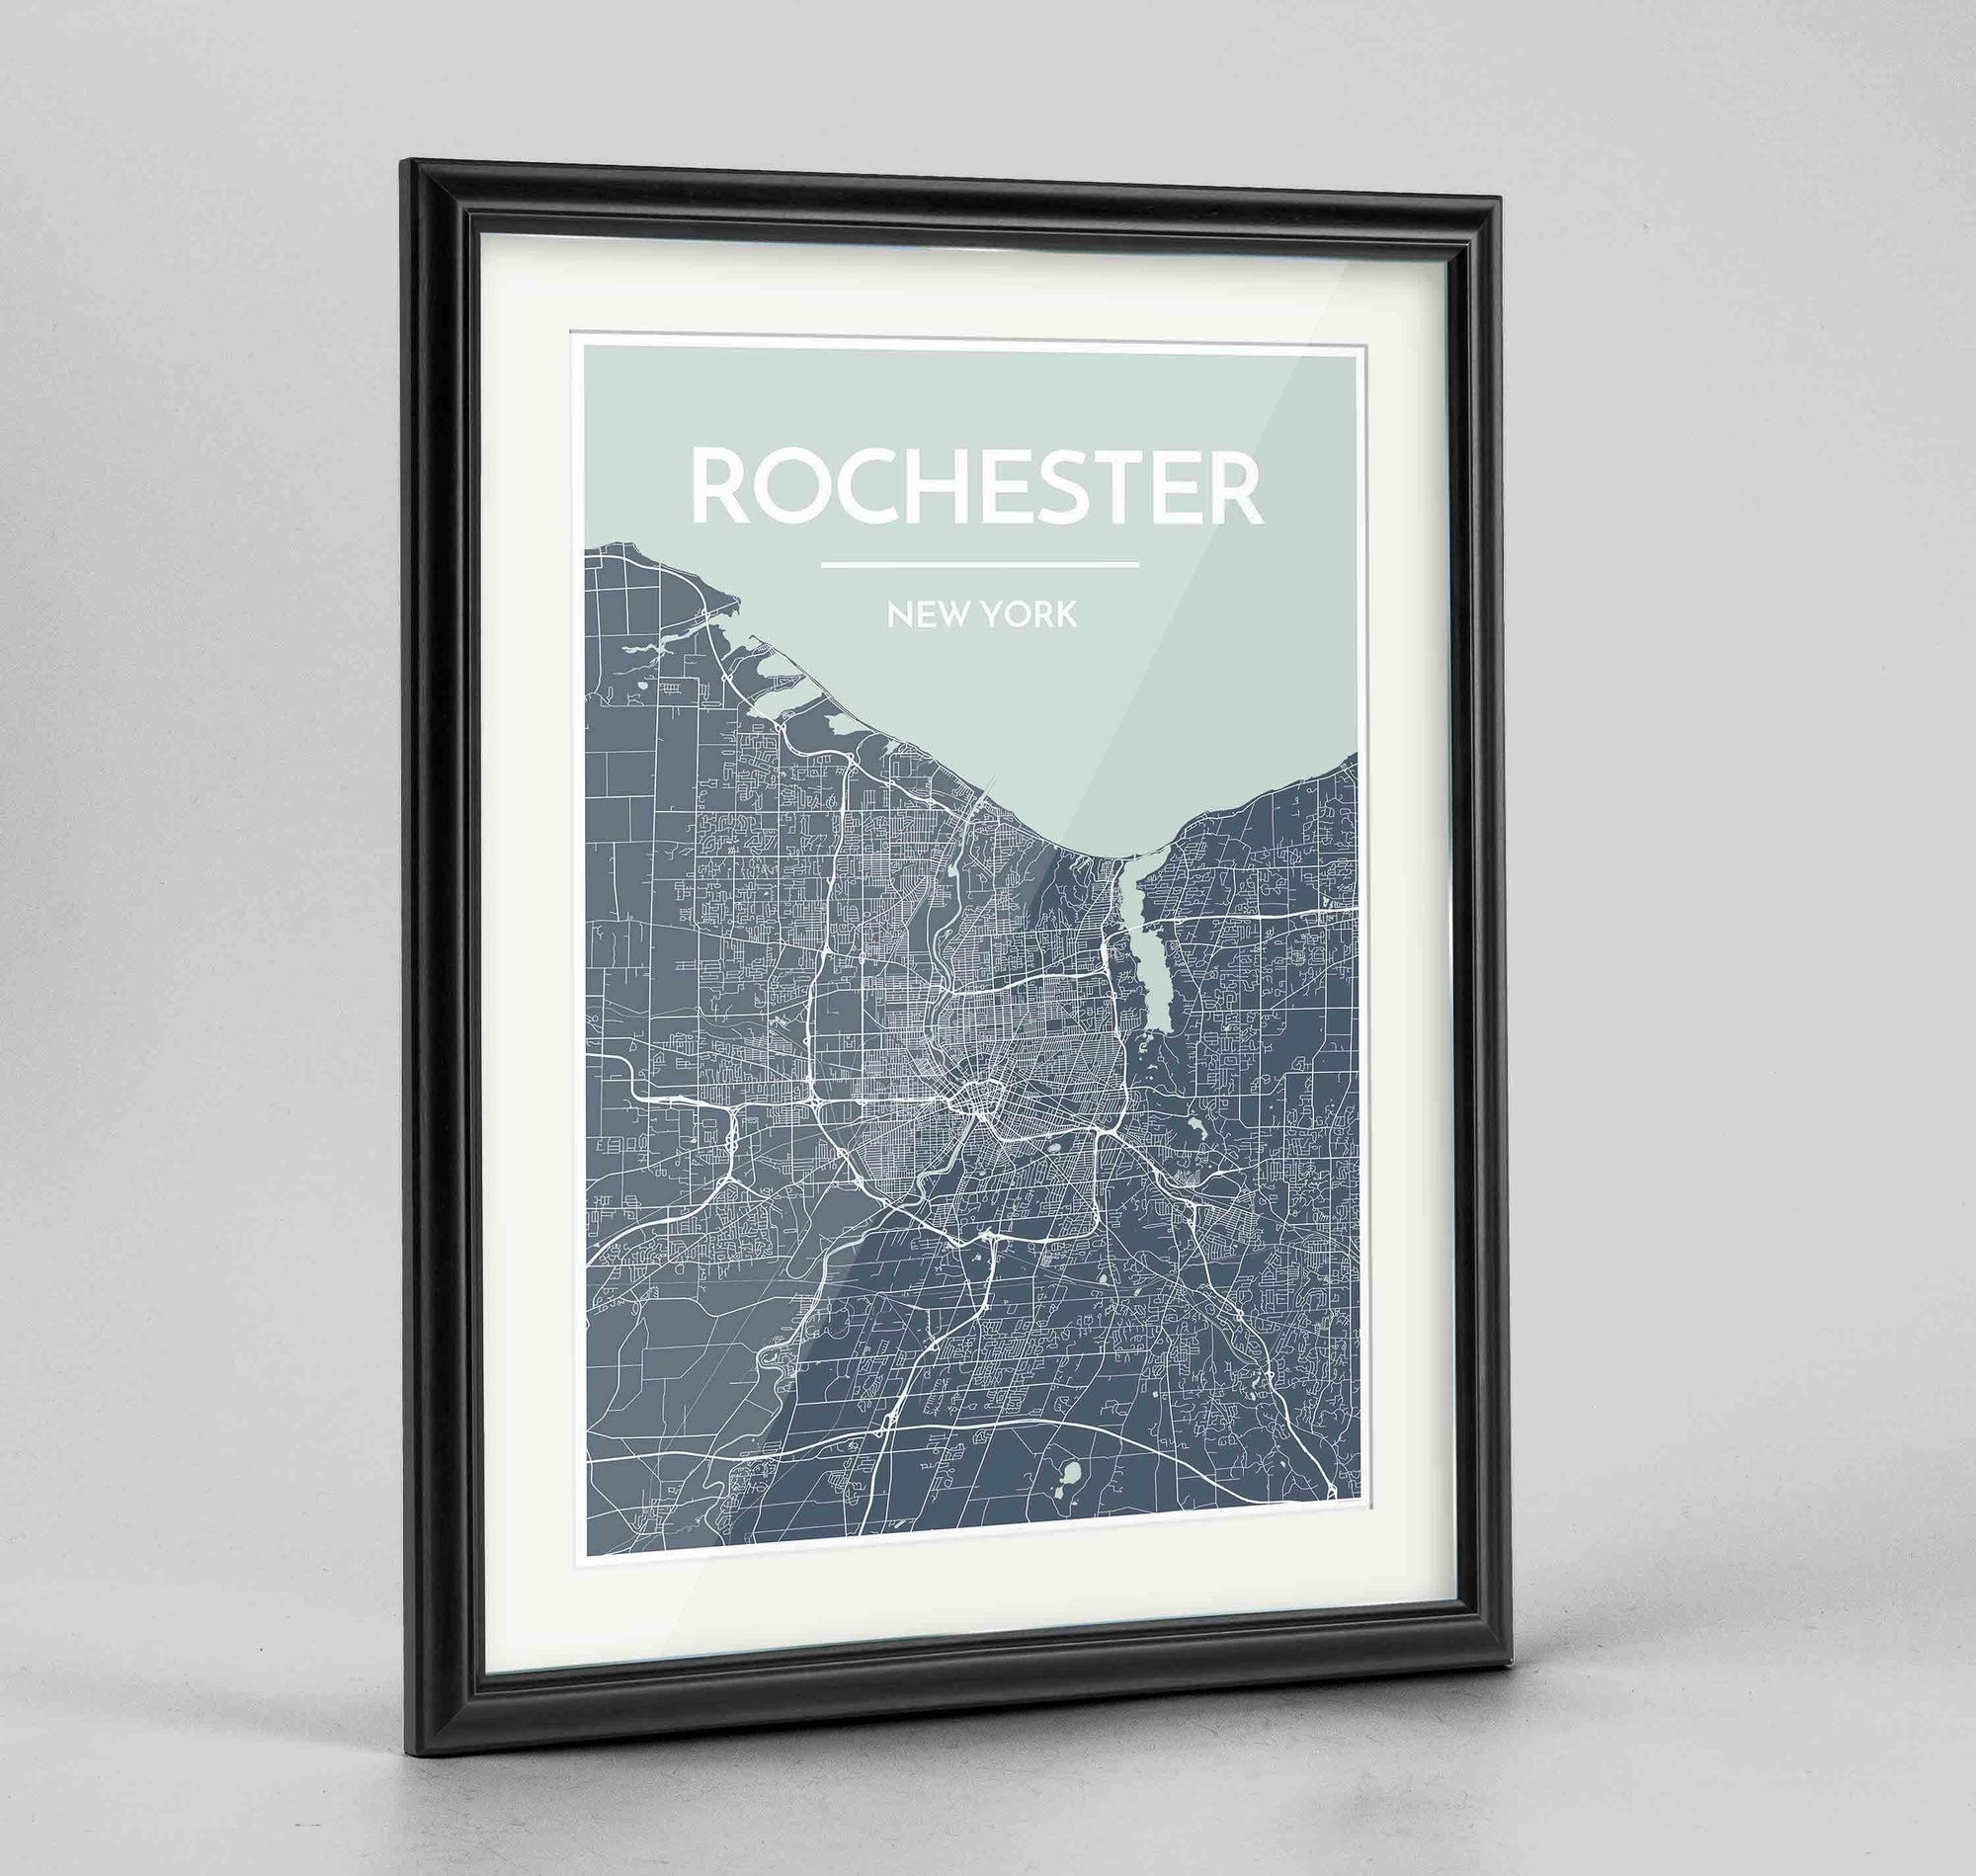 Framed Rochester Map Art Print 24x36" Traditional Black frame Point Two Design Group